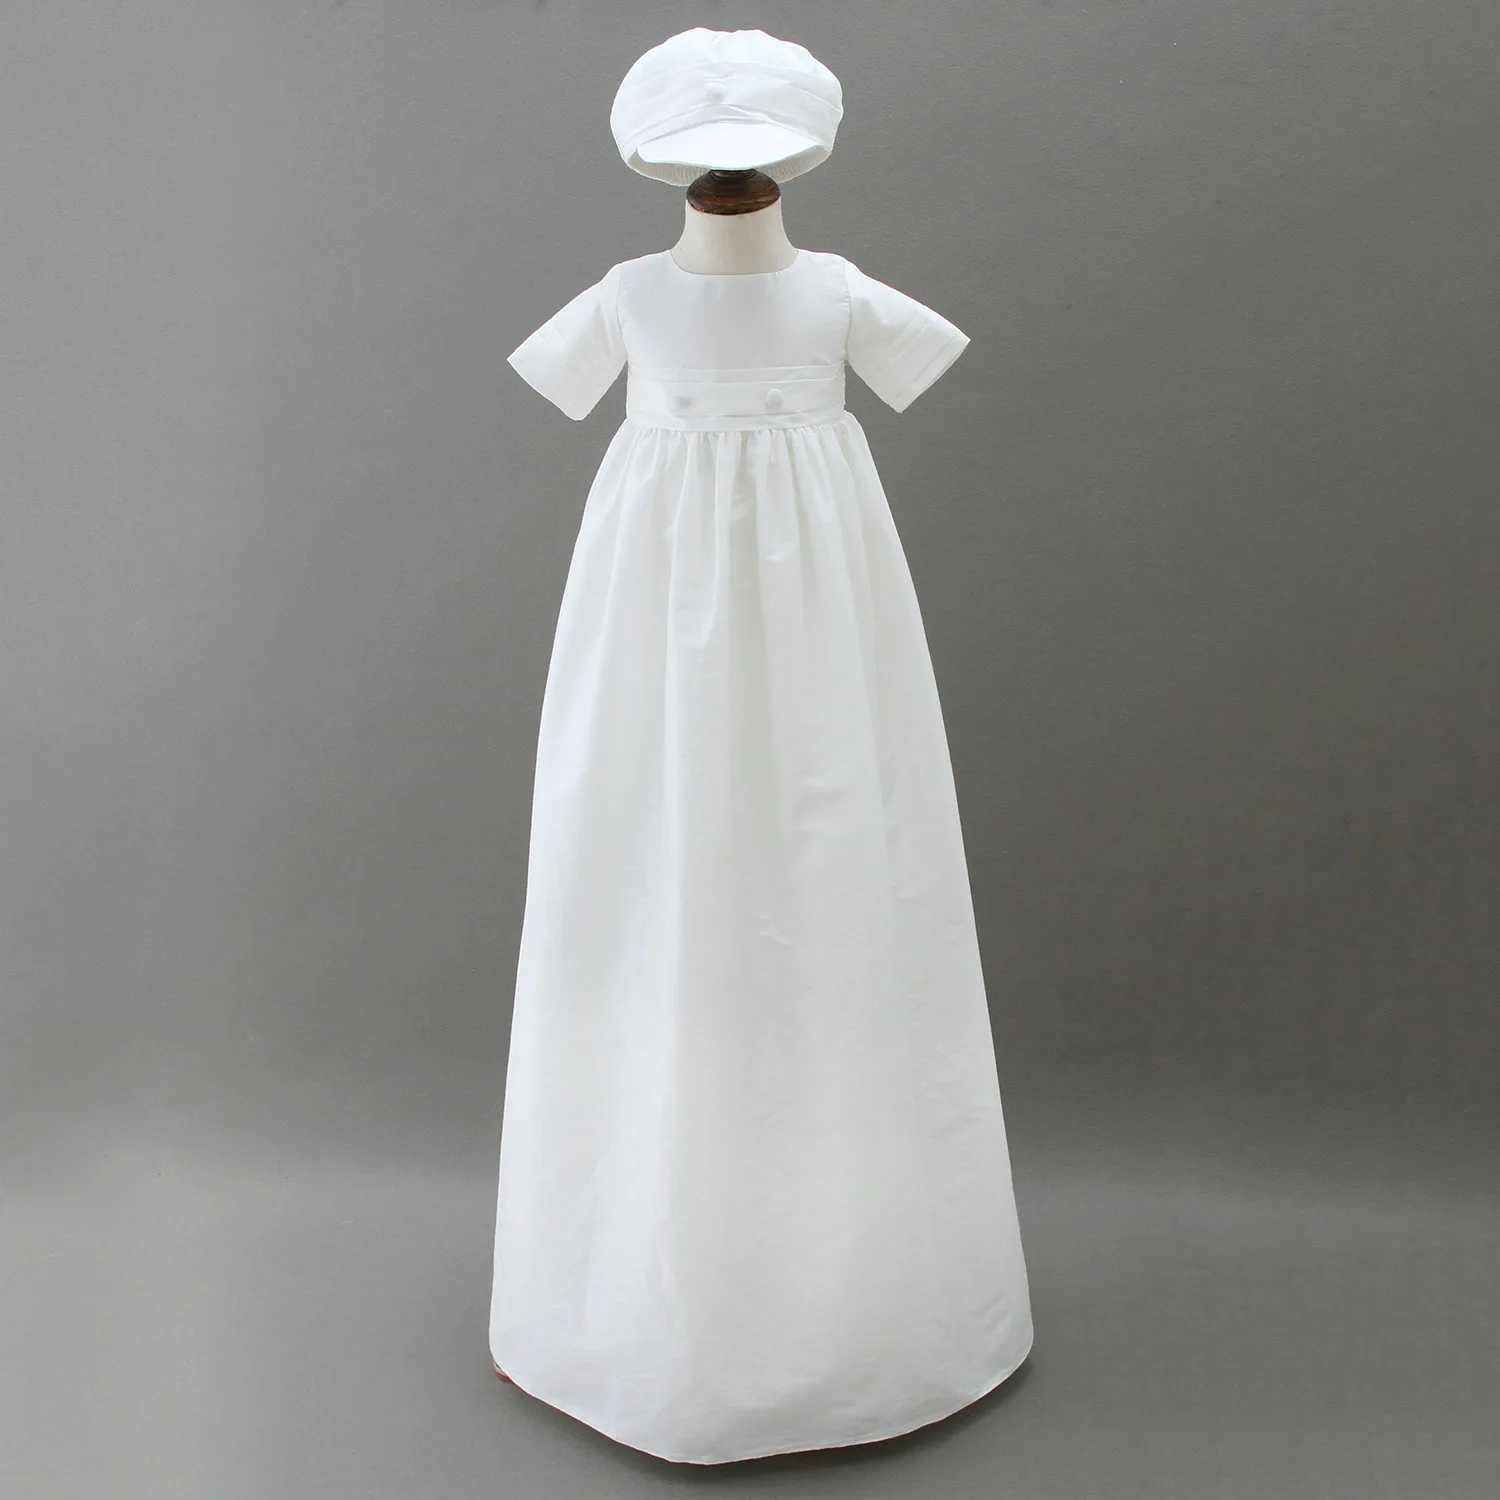 Girl's Dresses Solid Girl Boy long Dresses Christening Baby Baptism Clothes with Hat 0-2 Years d240425